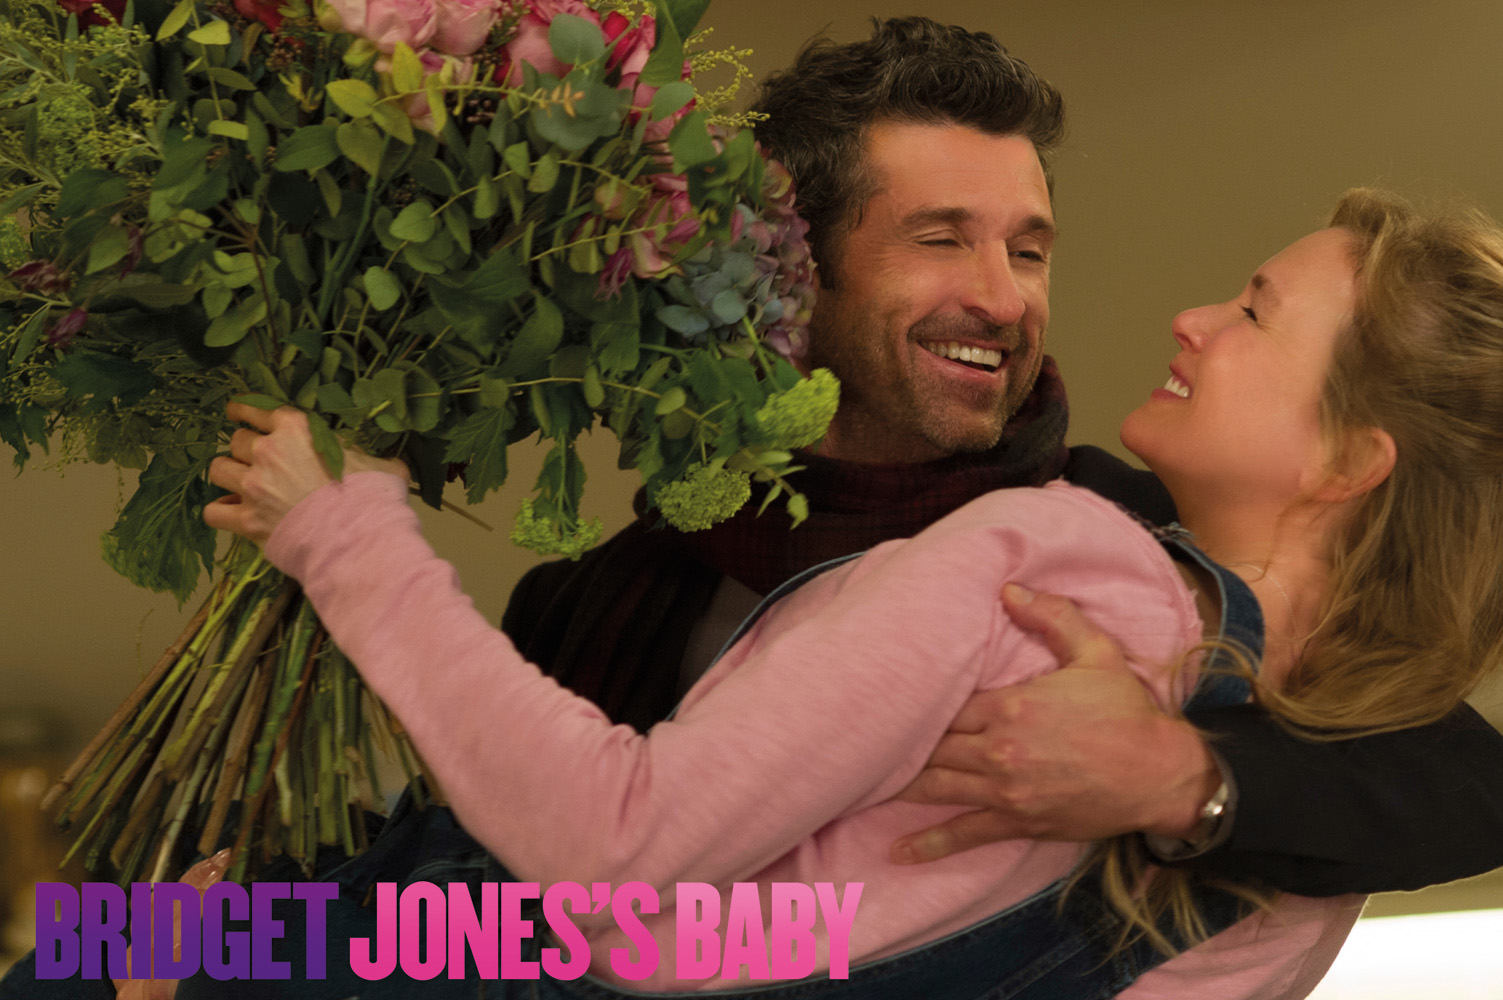 Patrick Dempsey, one of the possible fathers of “BRIDGET JONES’S BABY”